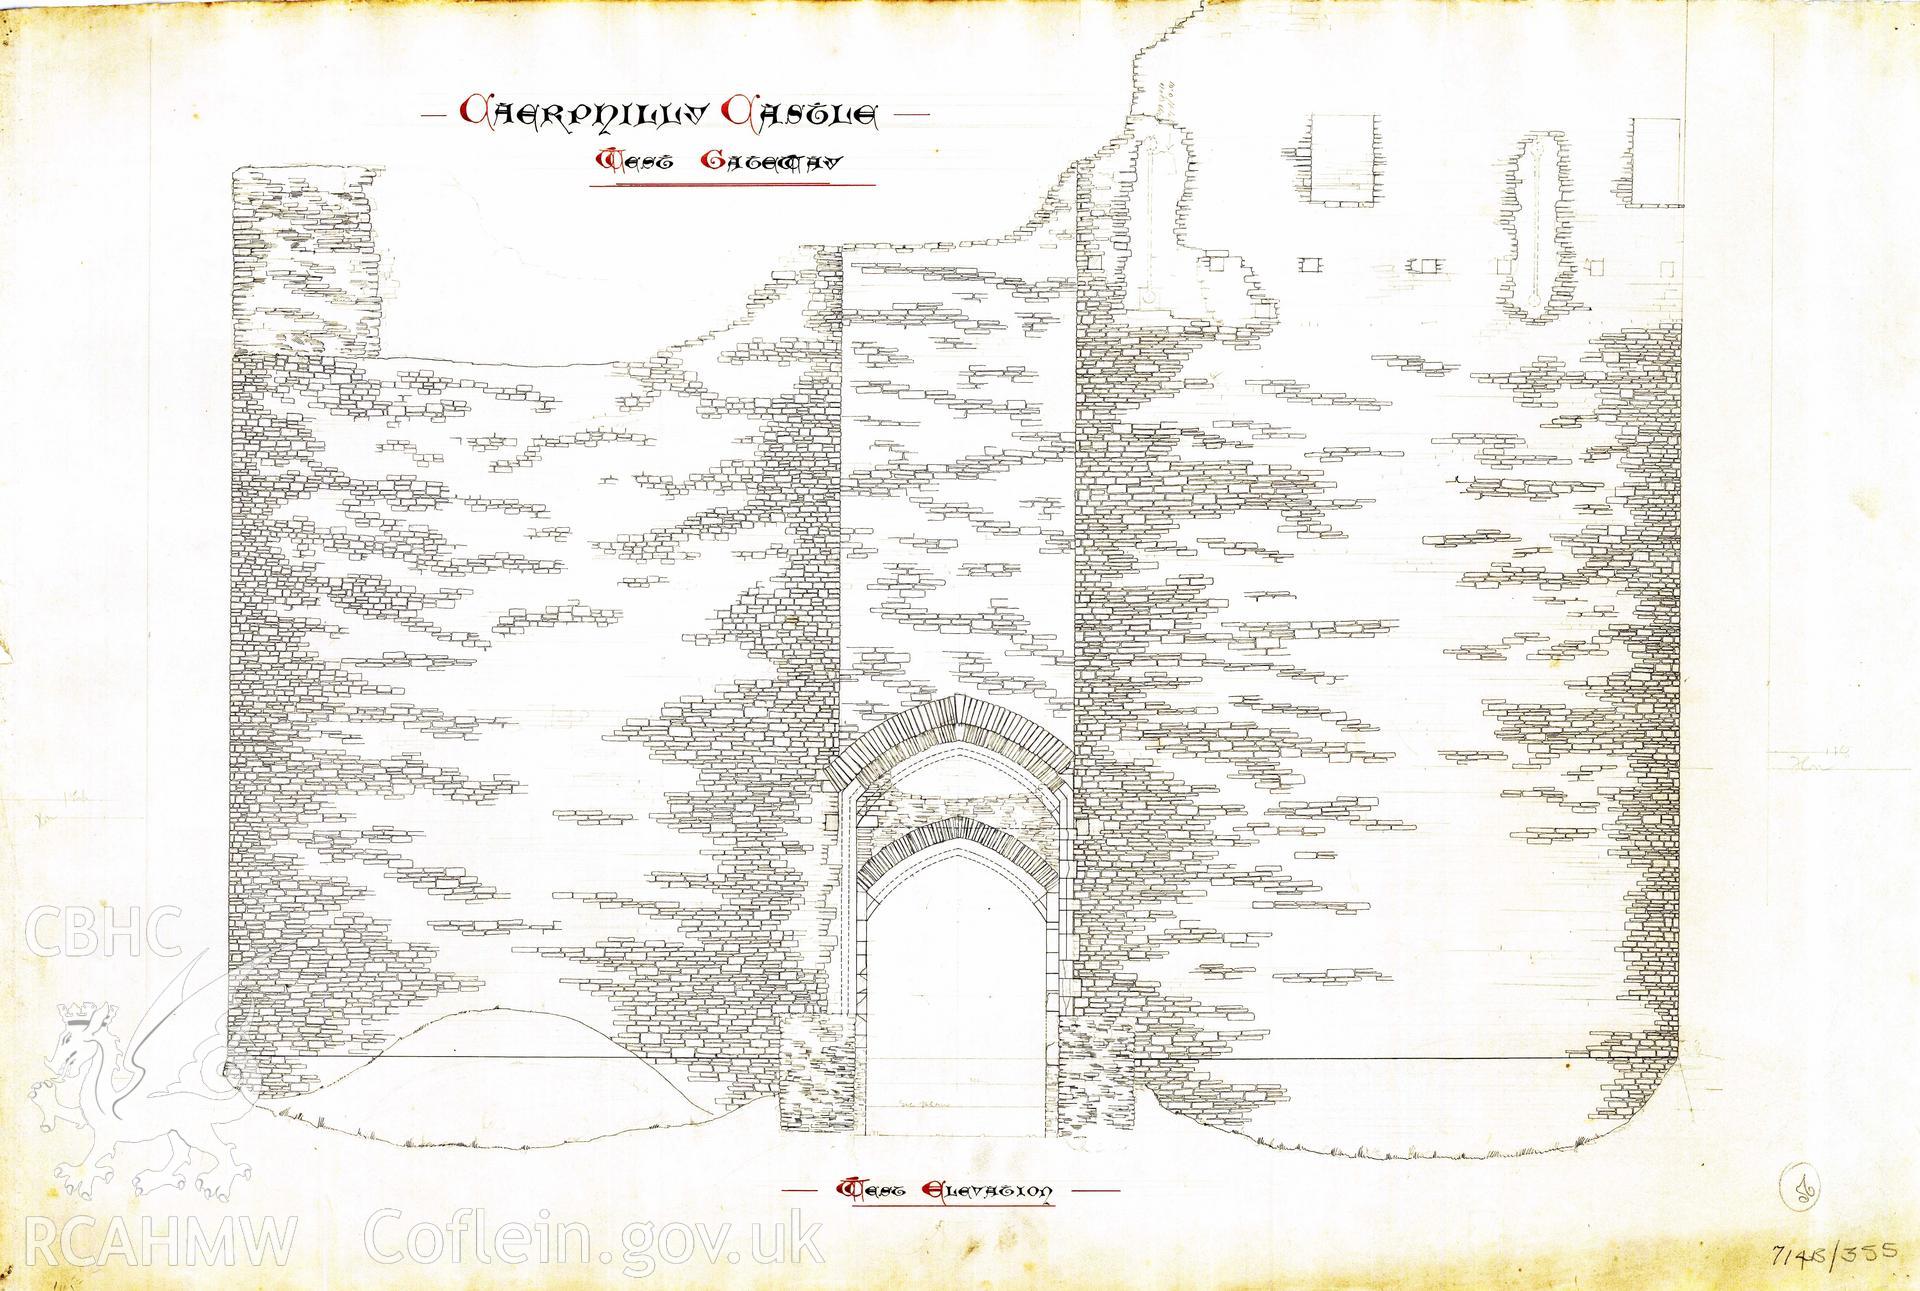 Cadw guardianship monument drawing of Caerphilly Castle. Inner W gate, W (ext) elev. Cadw Ref. No:714B/355. Scale 1:24.